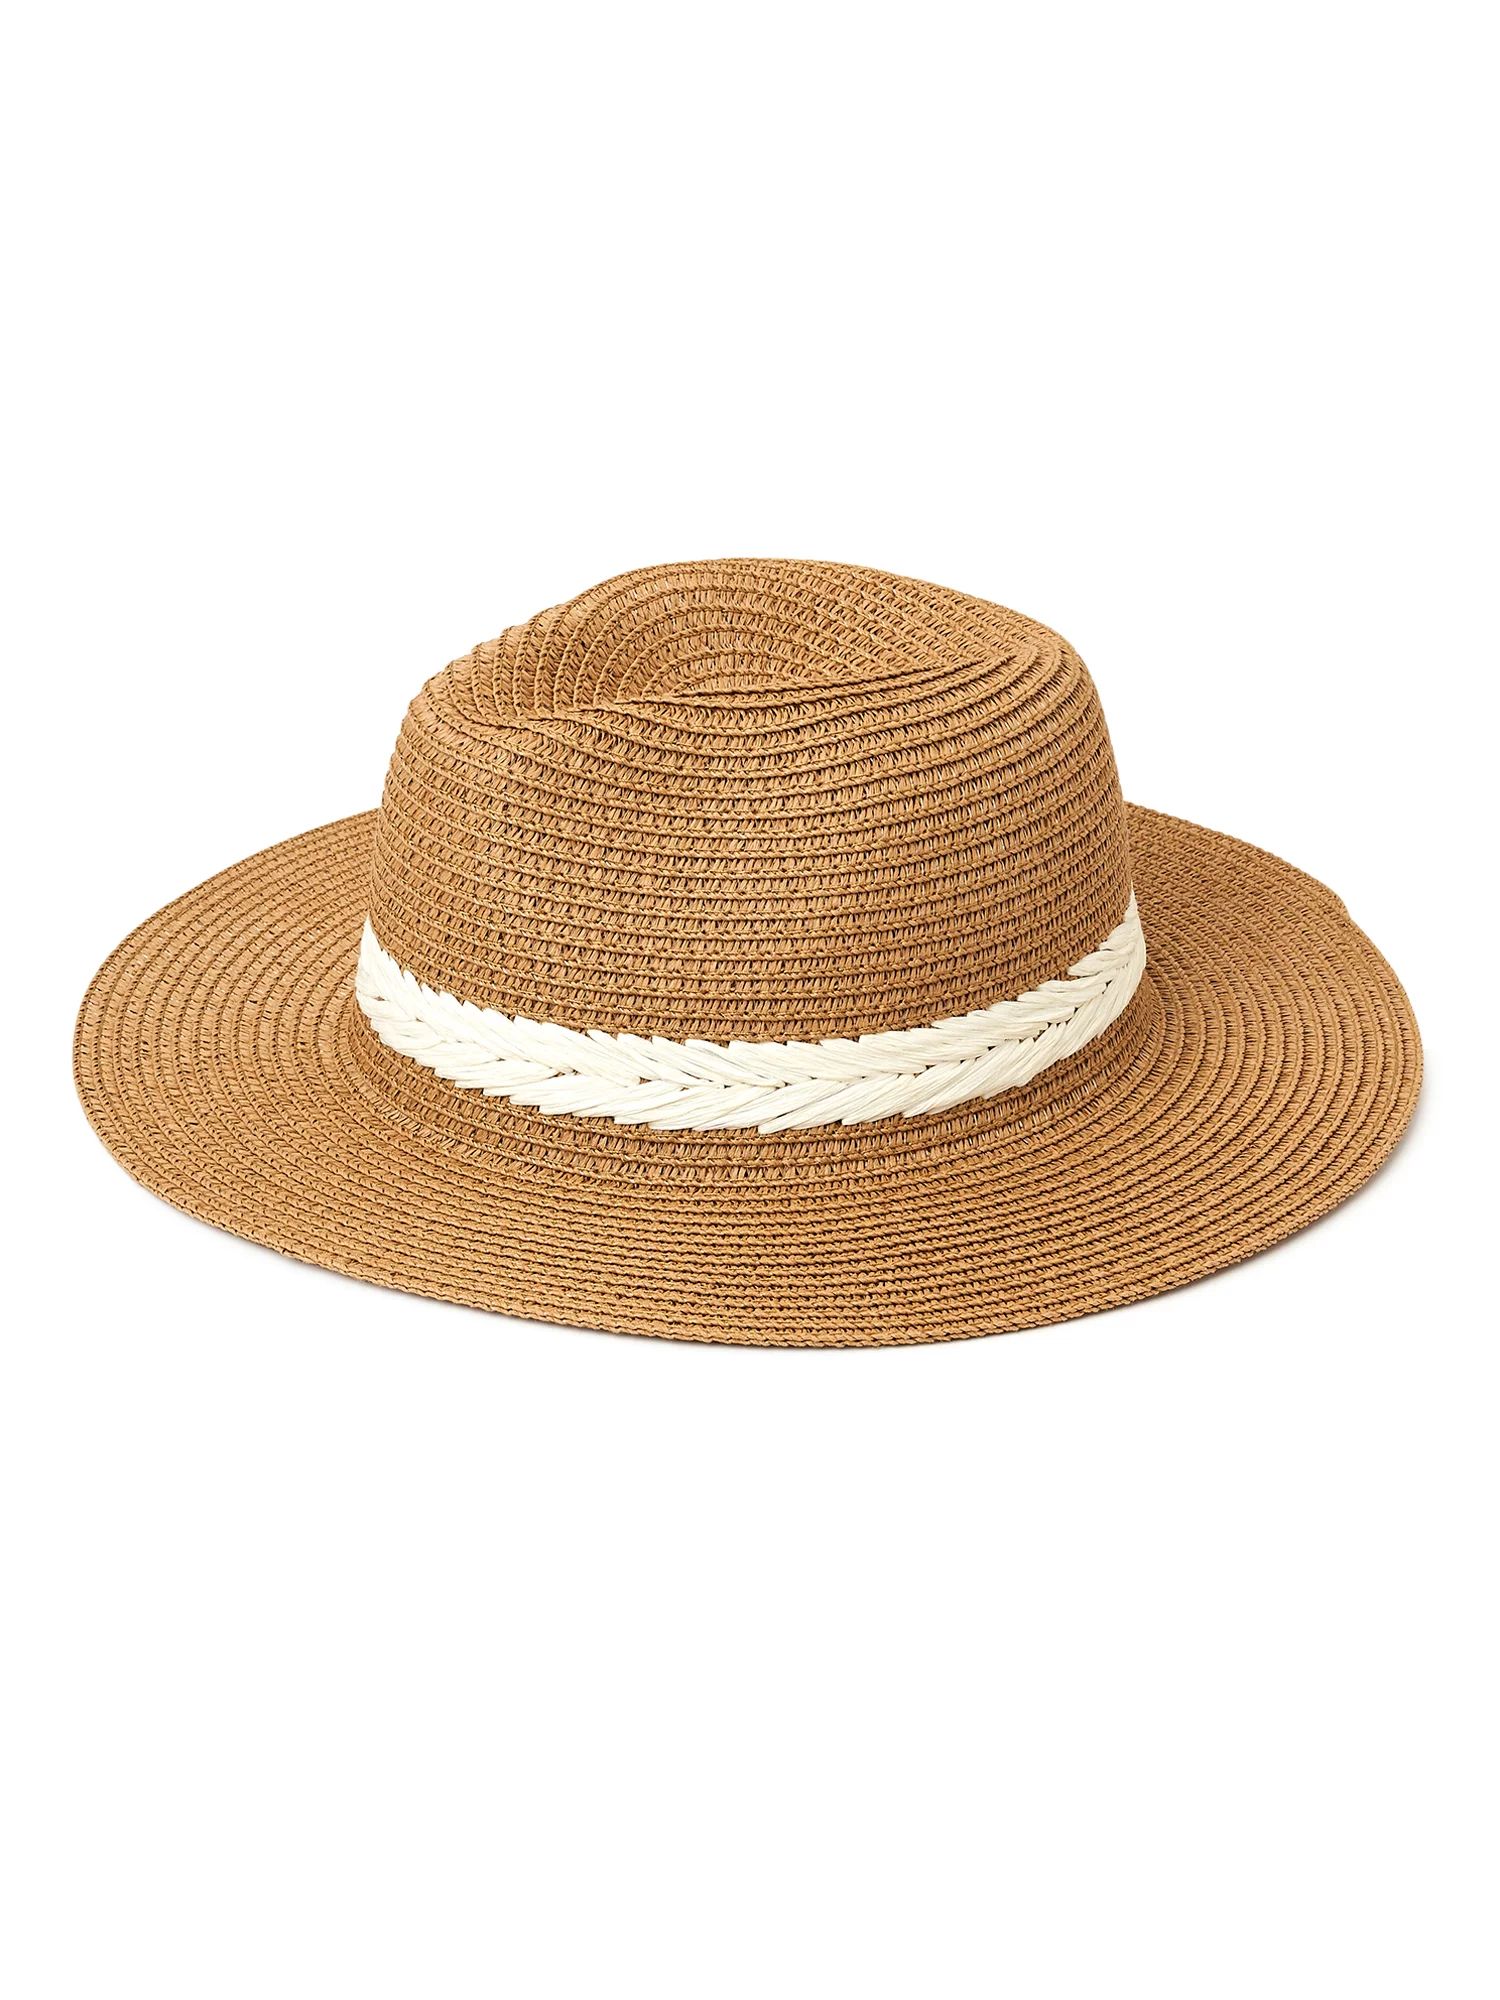 Time and TruTime and Tru Women's Embroidered Fedora HatUSDNow $8.99was $17.97$17.97(4.5)4.5 stars... | Walmart (US)